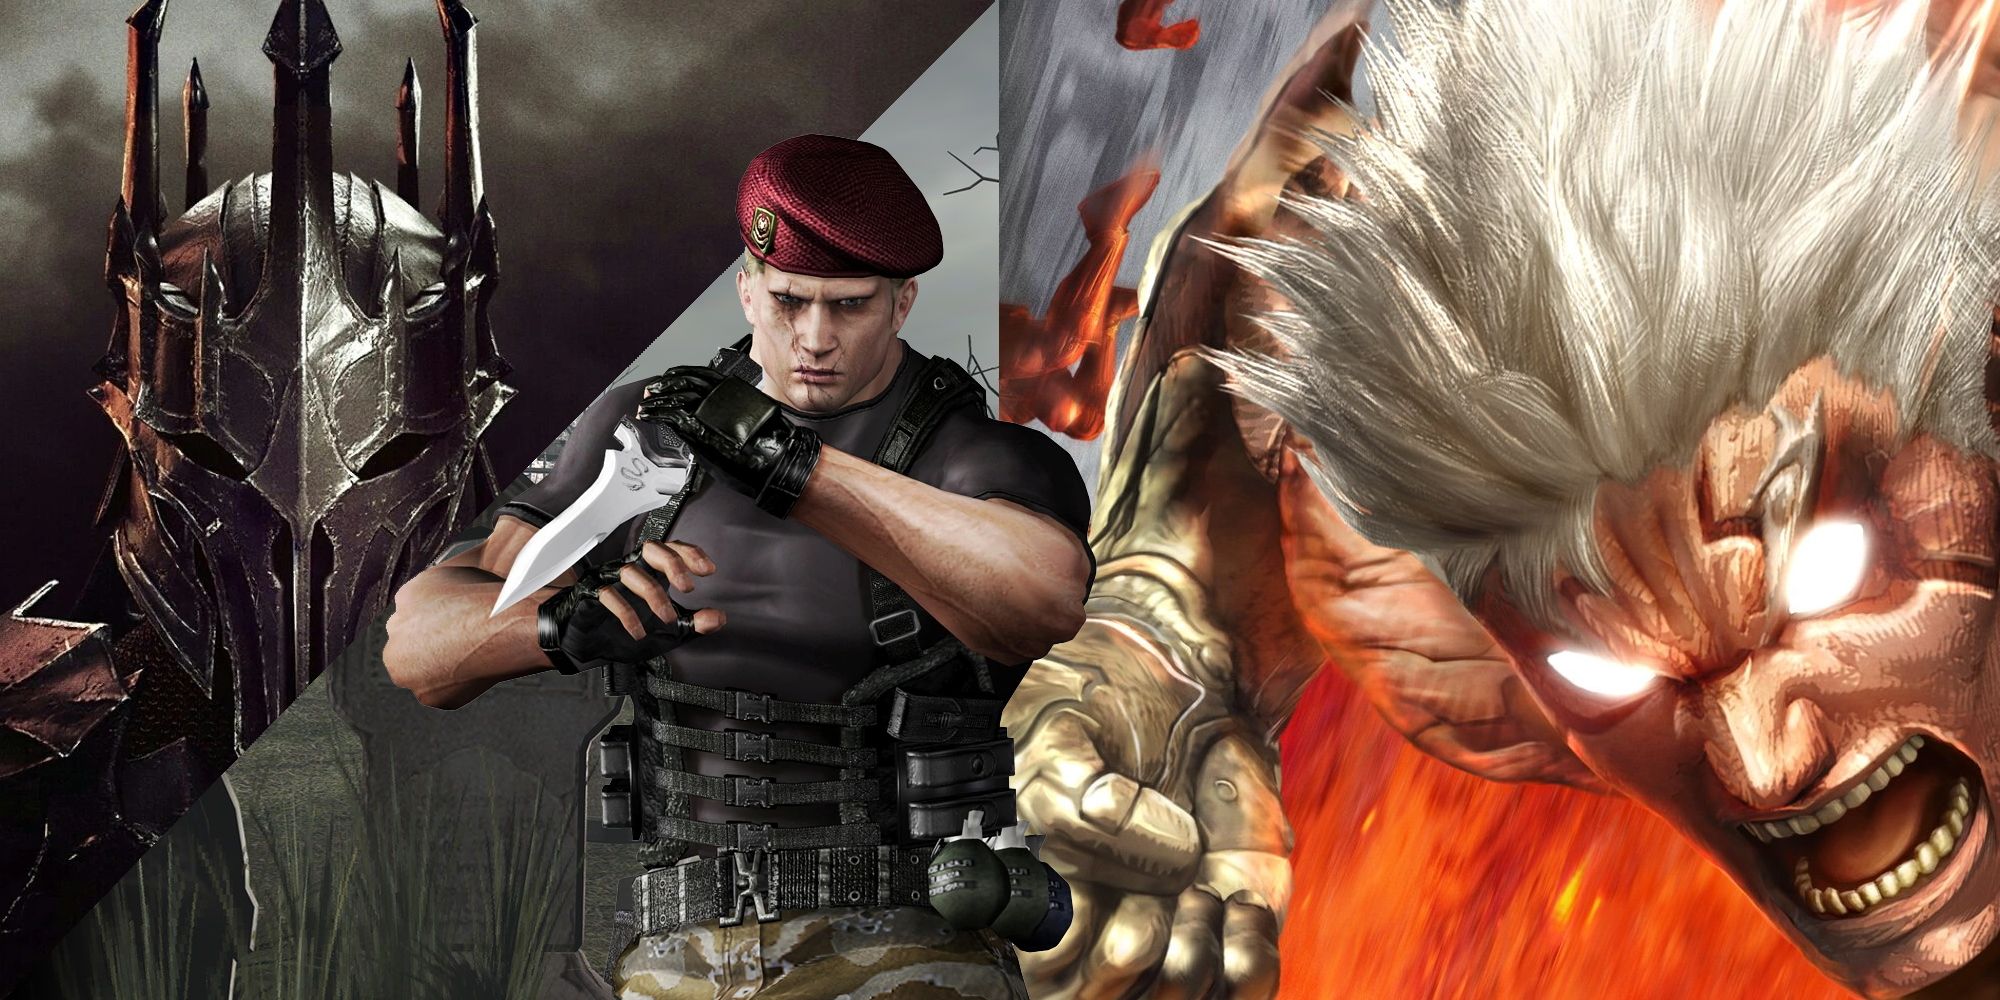 QTE Featured Image (featuring Resident Evil 4's Krauser, Shadow of Mordor's Sauron, and Asura from Asura's Wrath)